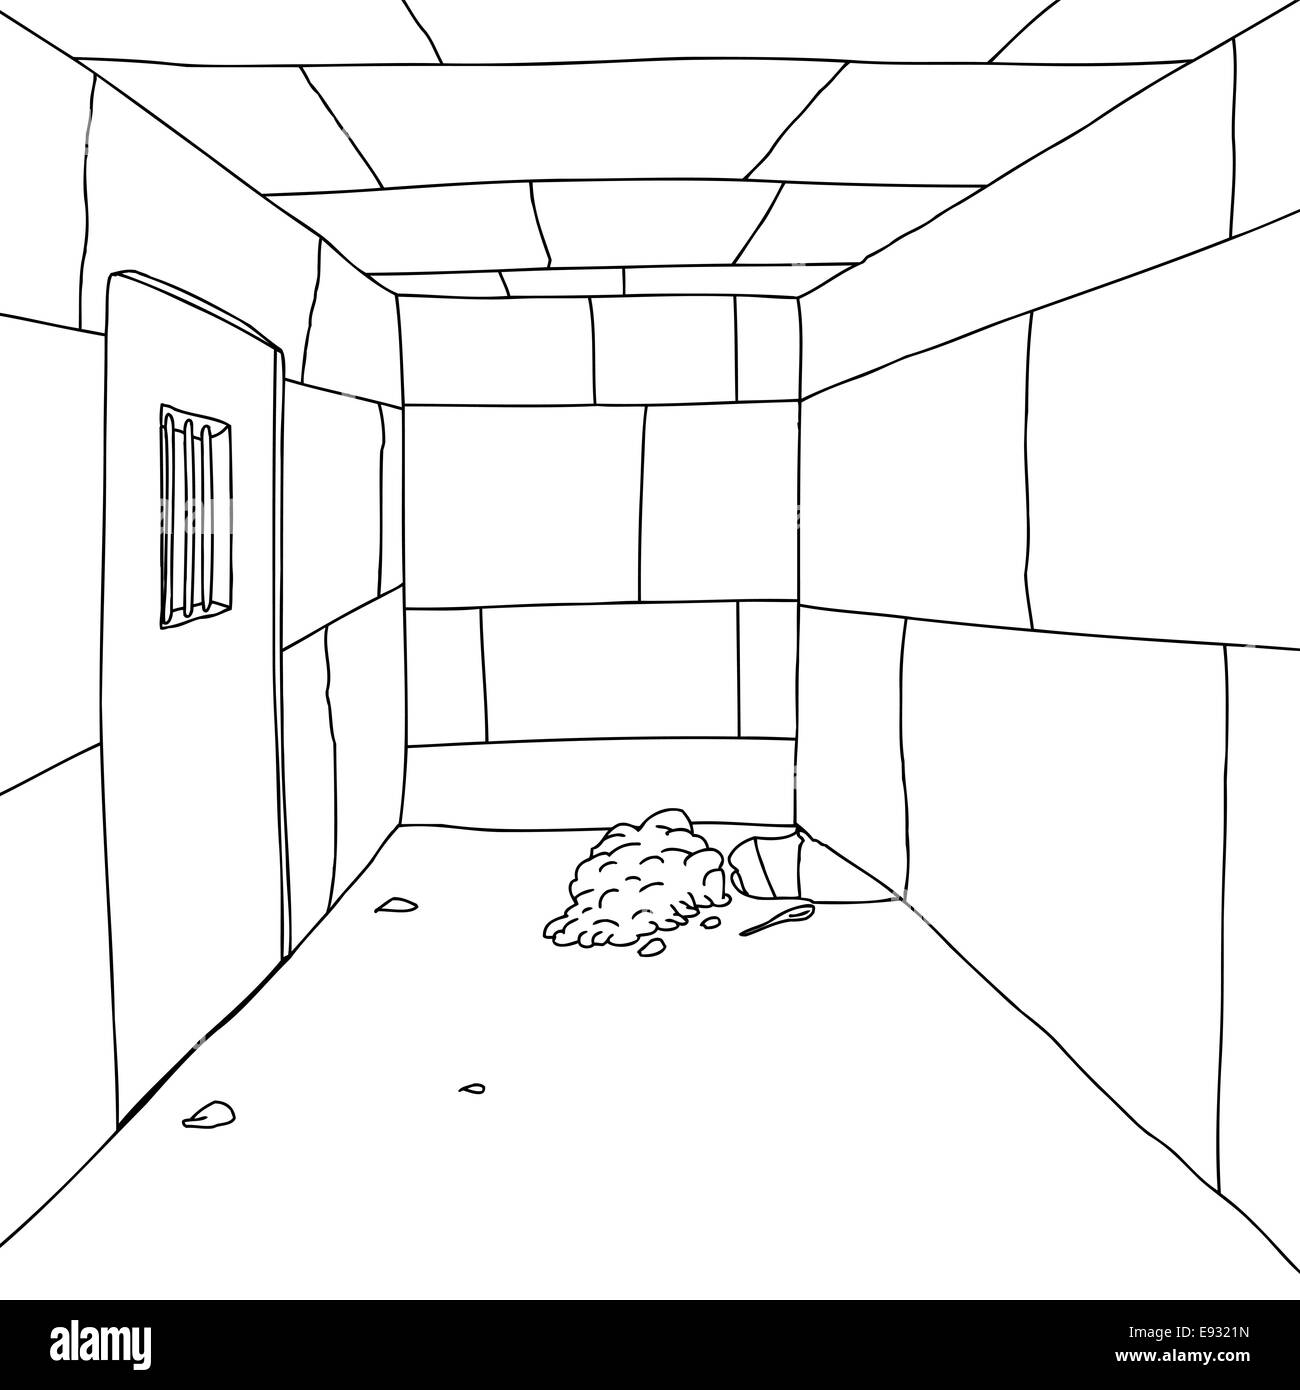 Outline background of prison cell with hole Stock Photo